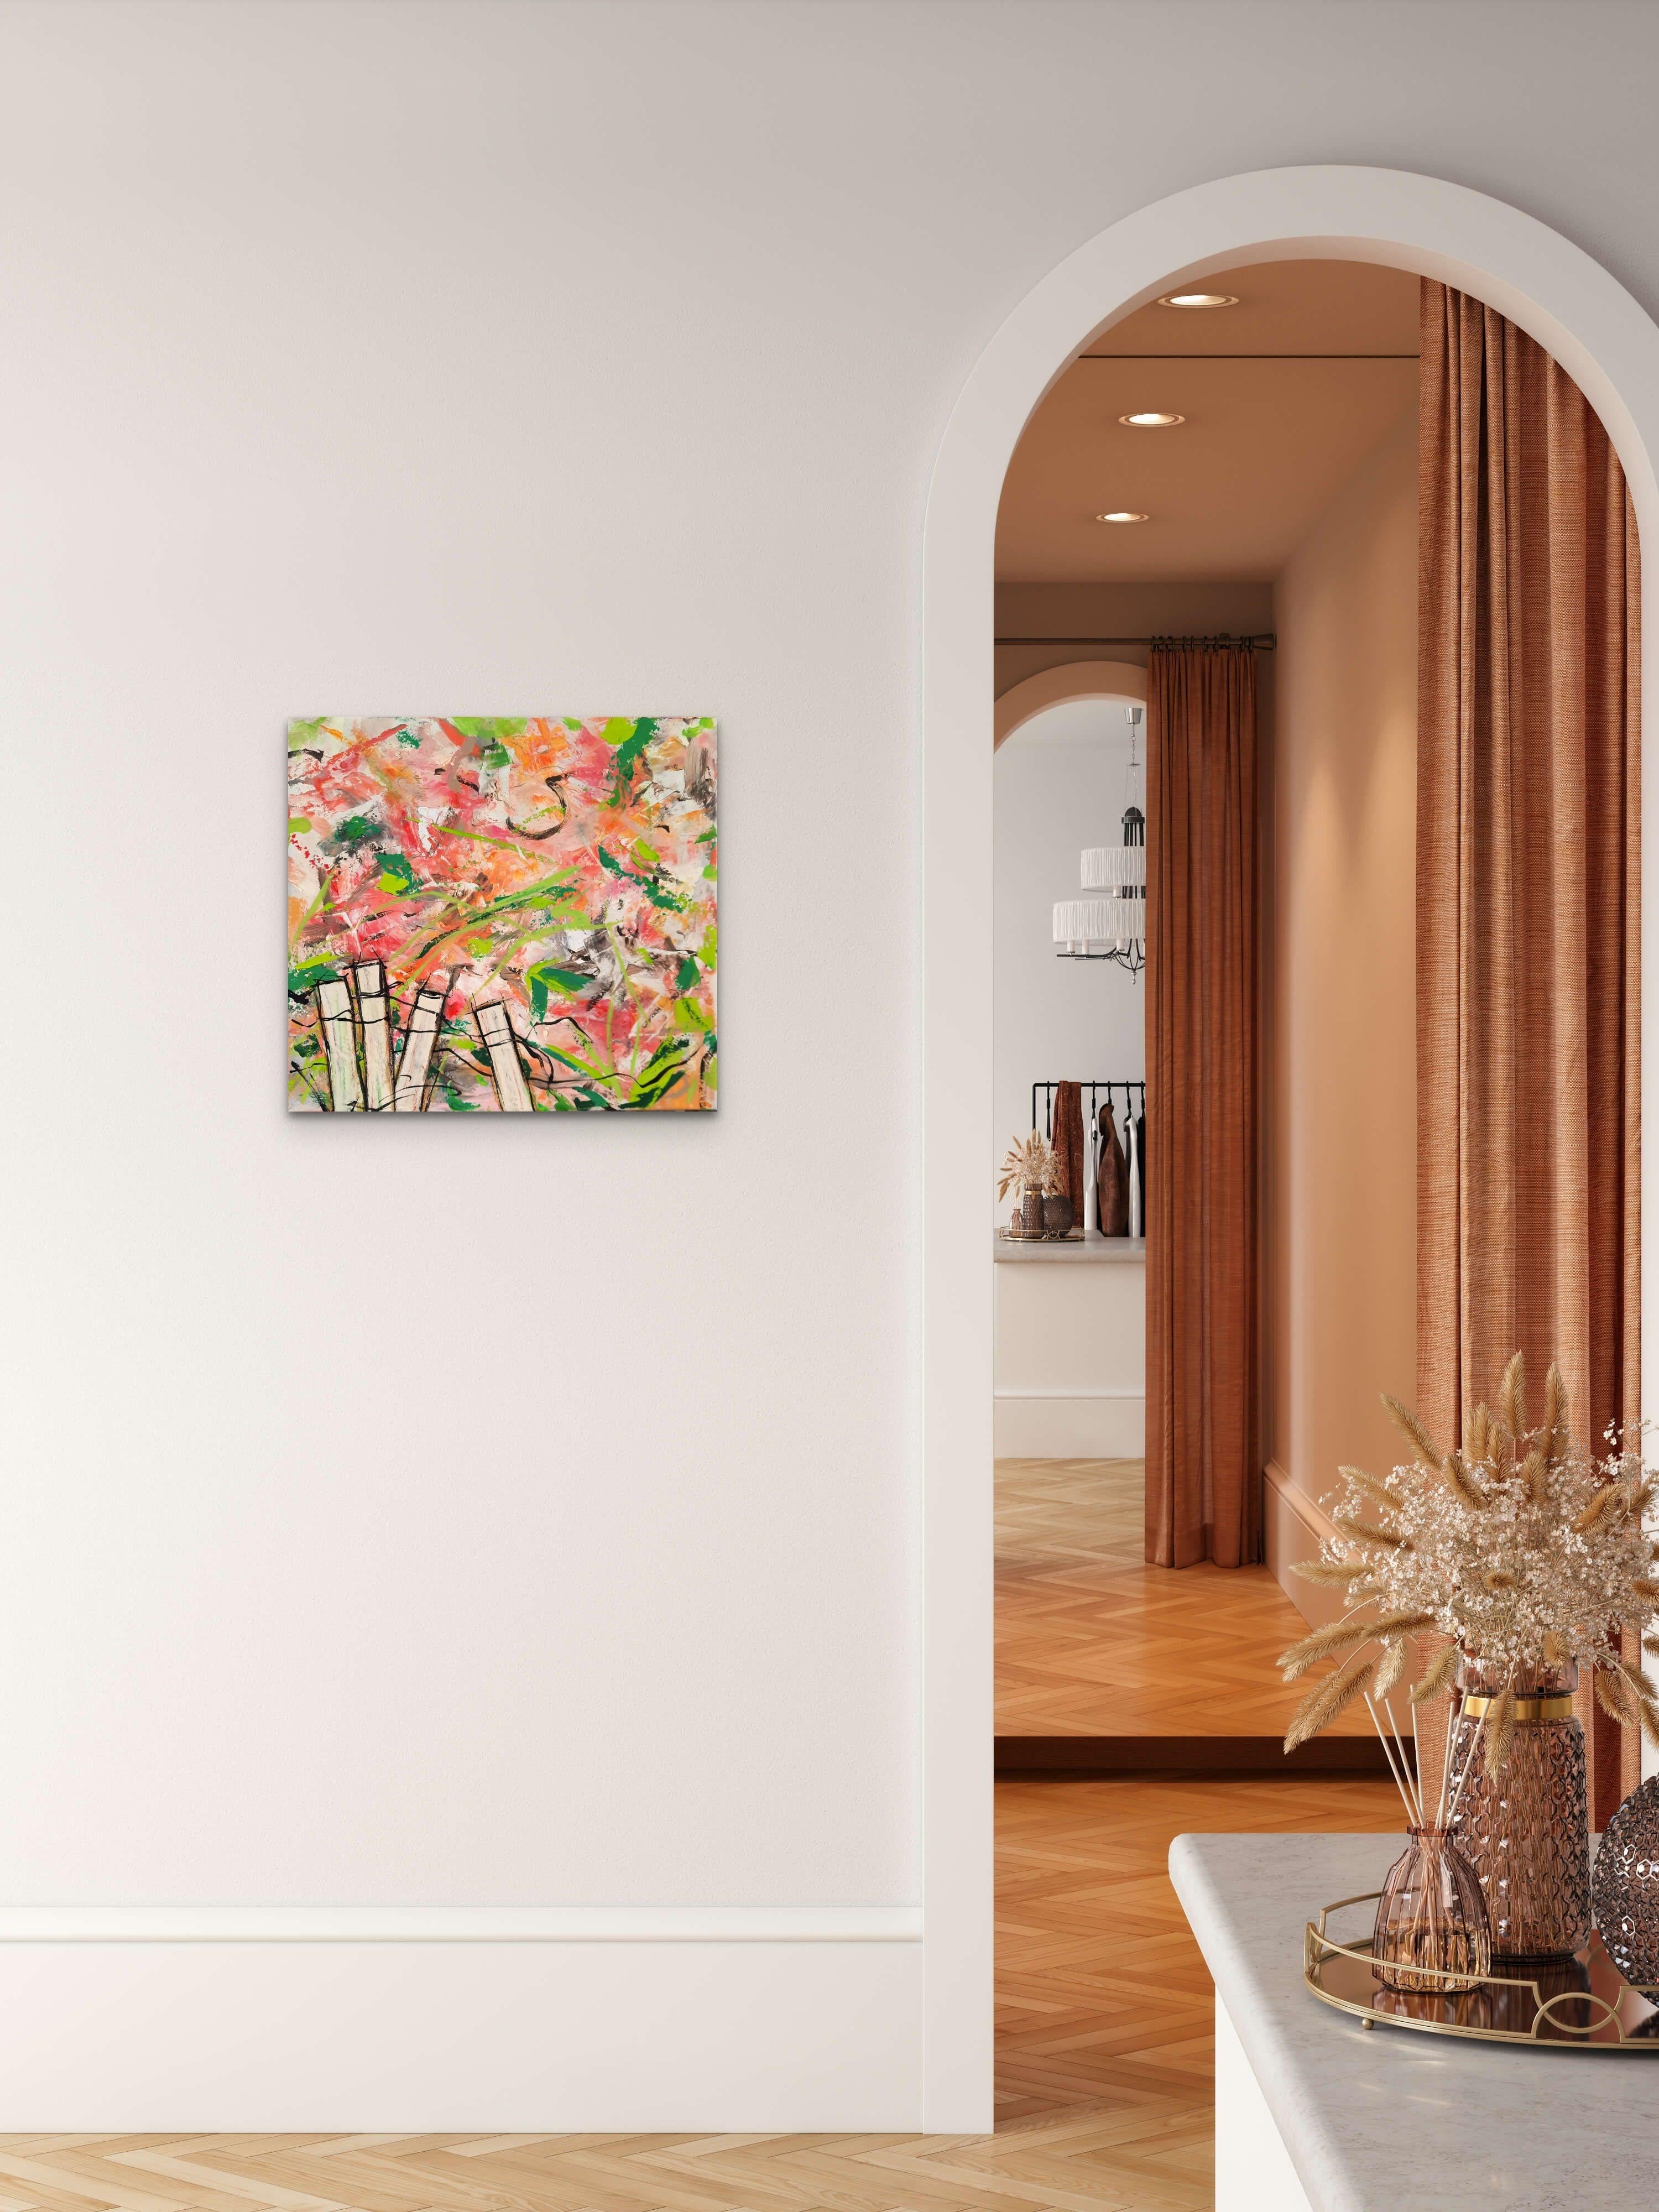 “A Garden View 3” is an explosion of spring color bursting out of the square canvas. This medium sized oil on canvas was inspired by spring as well as the prior painting A Garden View 1, which rests withing a reclaimed window frame. Envisioned as a